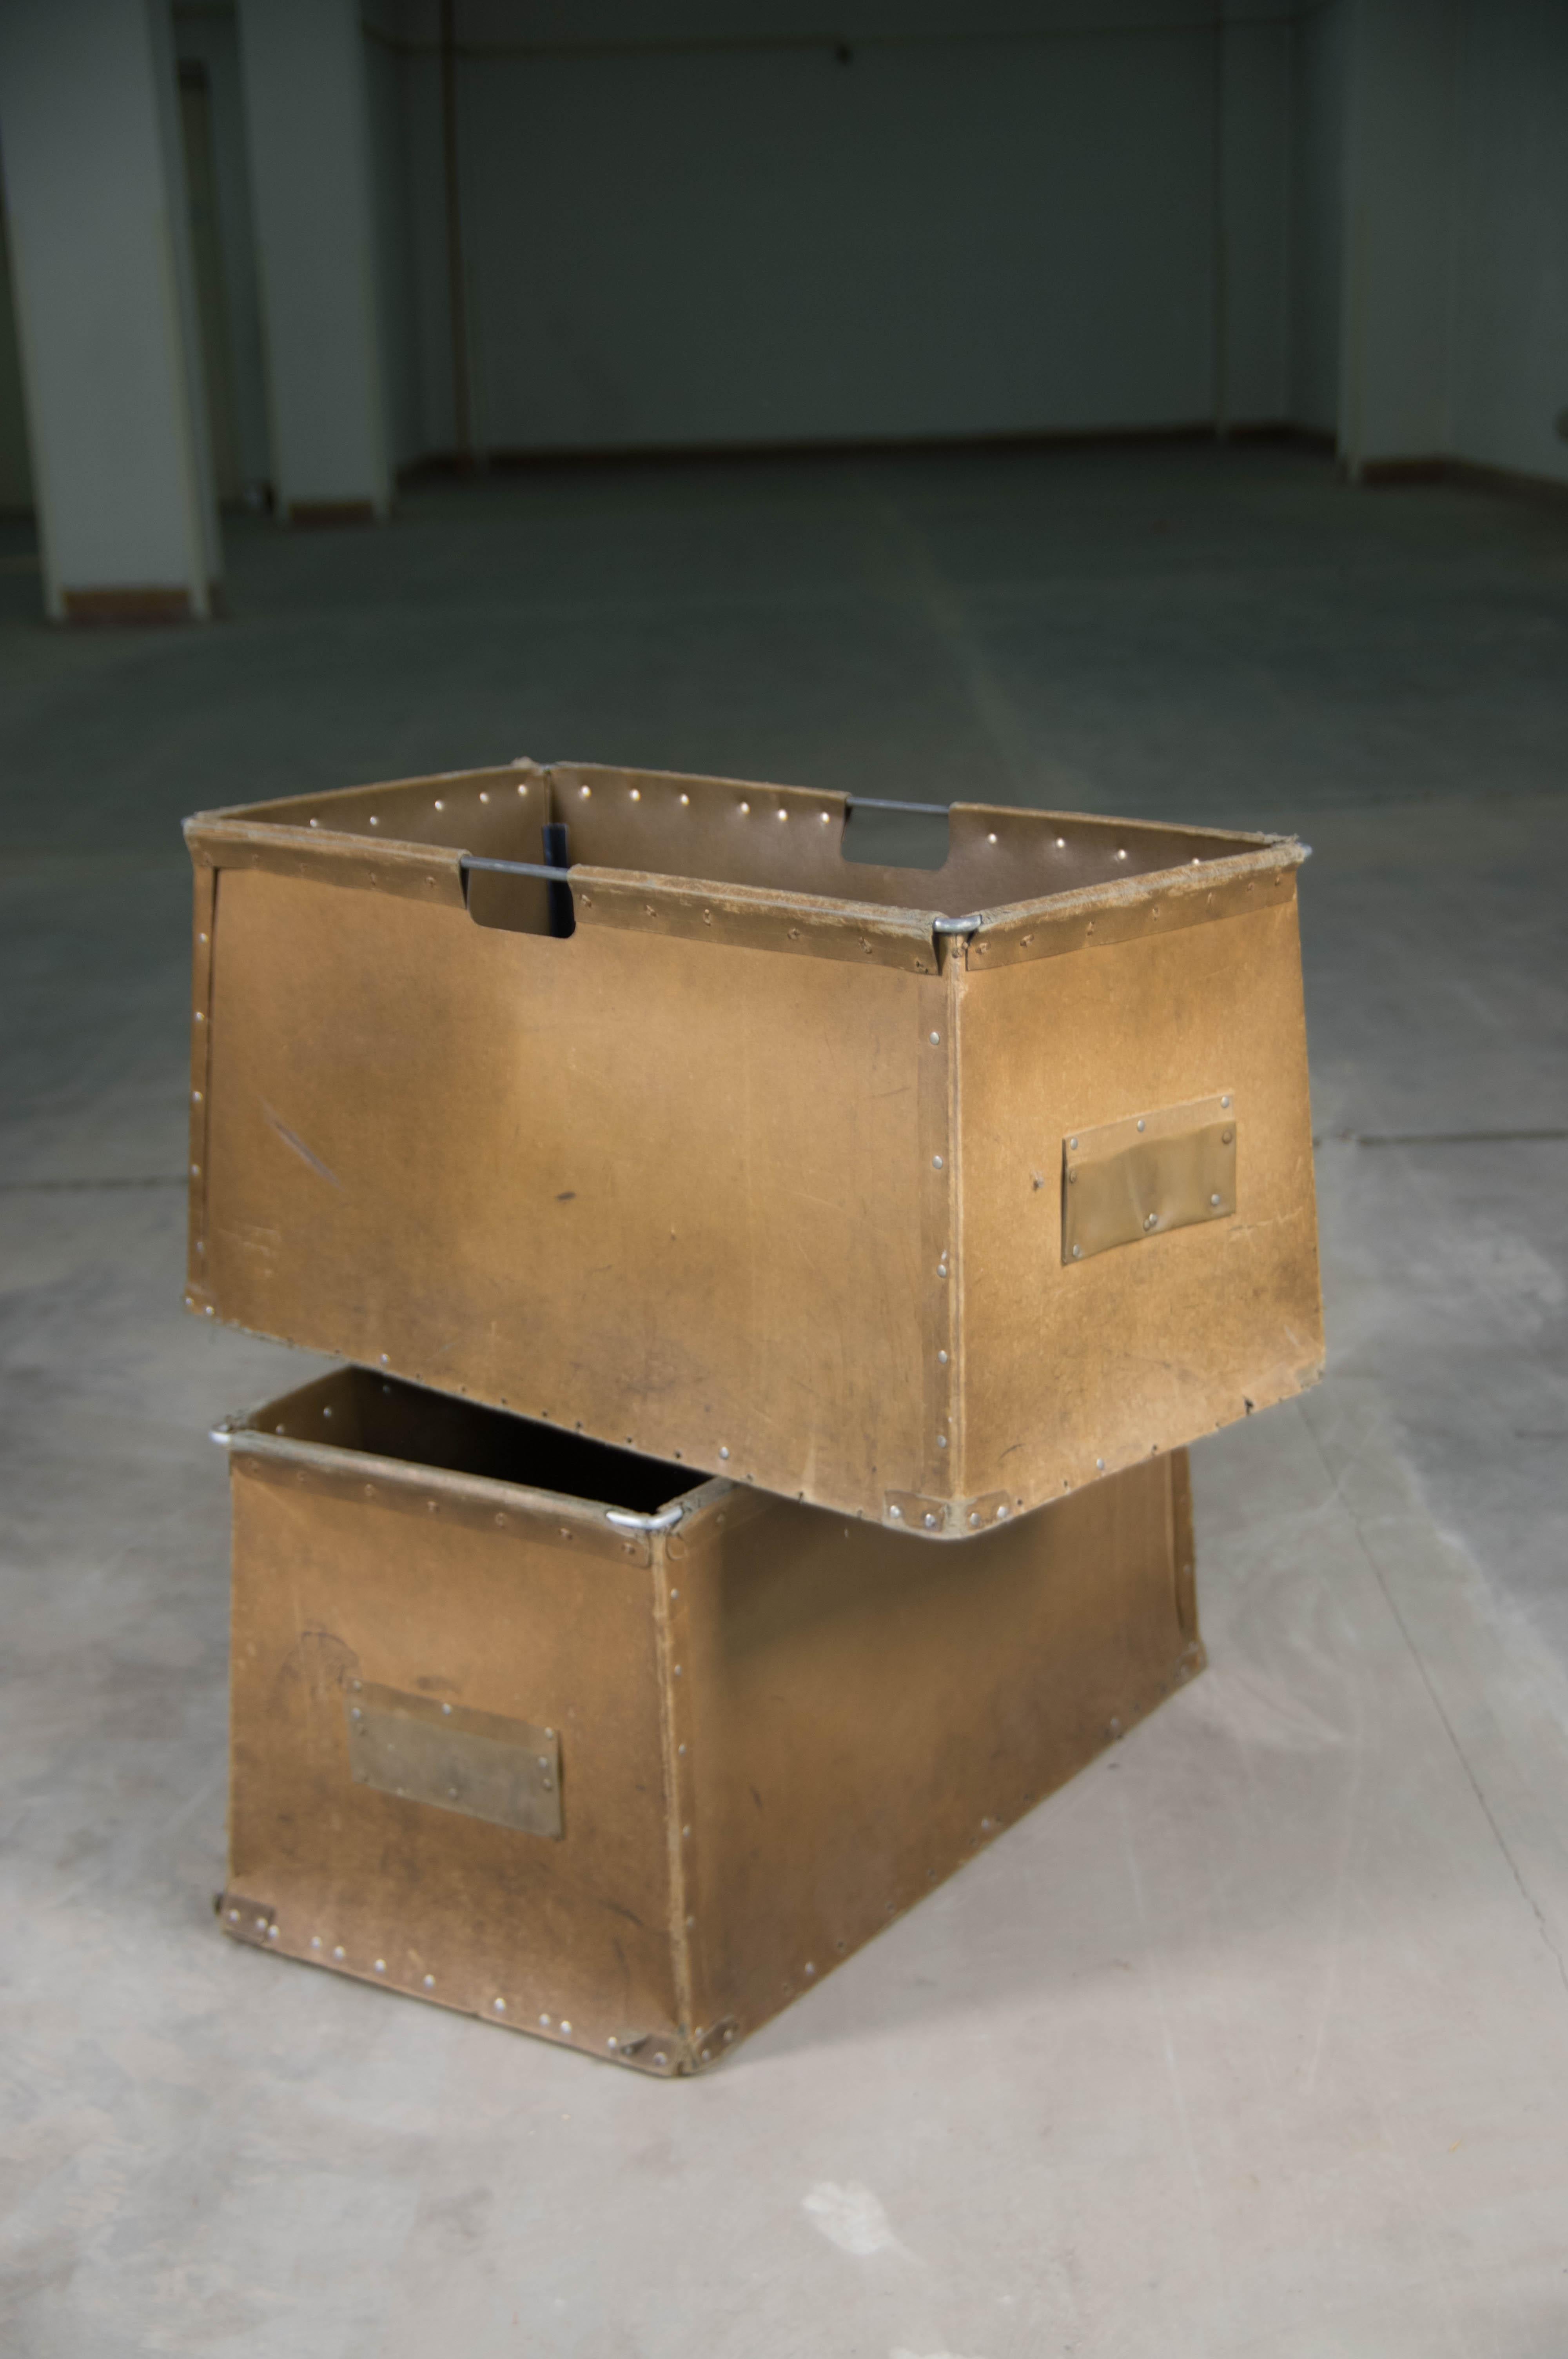 Storage and transport boxes made in the 1930s and used for almost a century in a textile factory. The lightweight and practical construction consists of steel wire and hard, strong paper boxes. They were designed for carrying lightweight textile